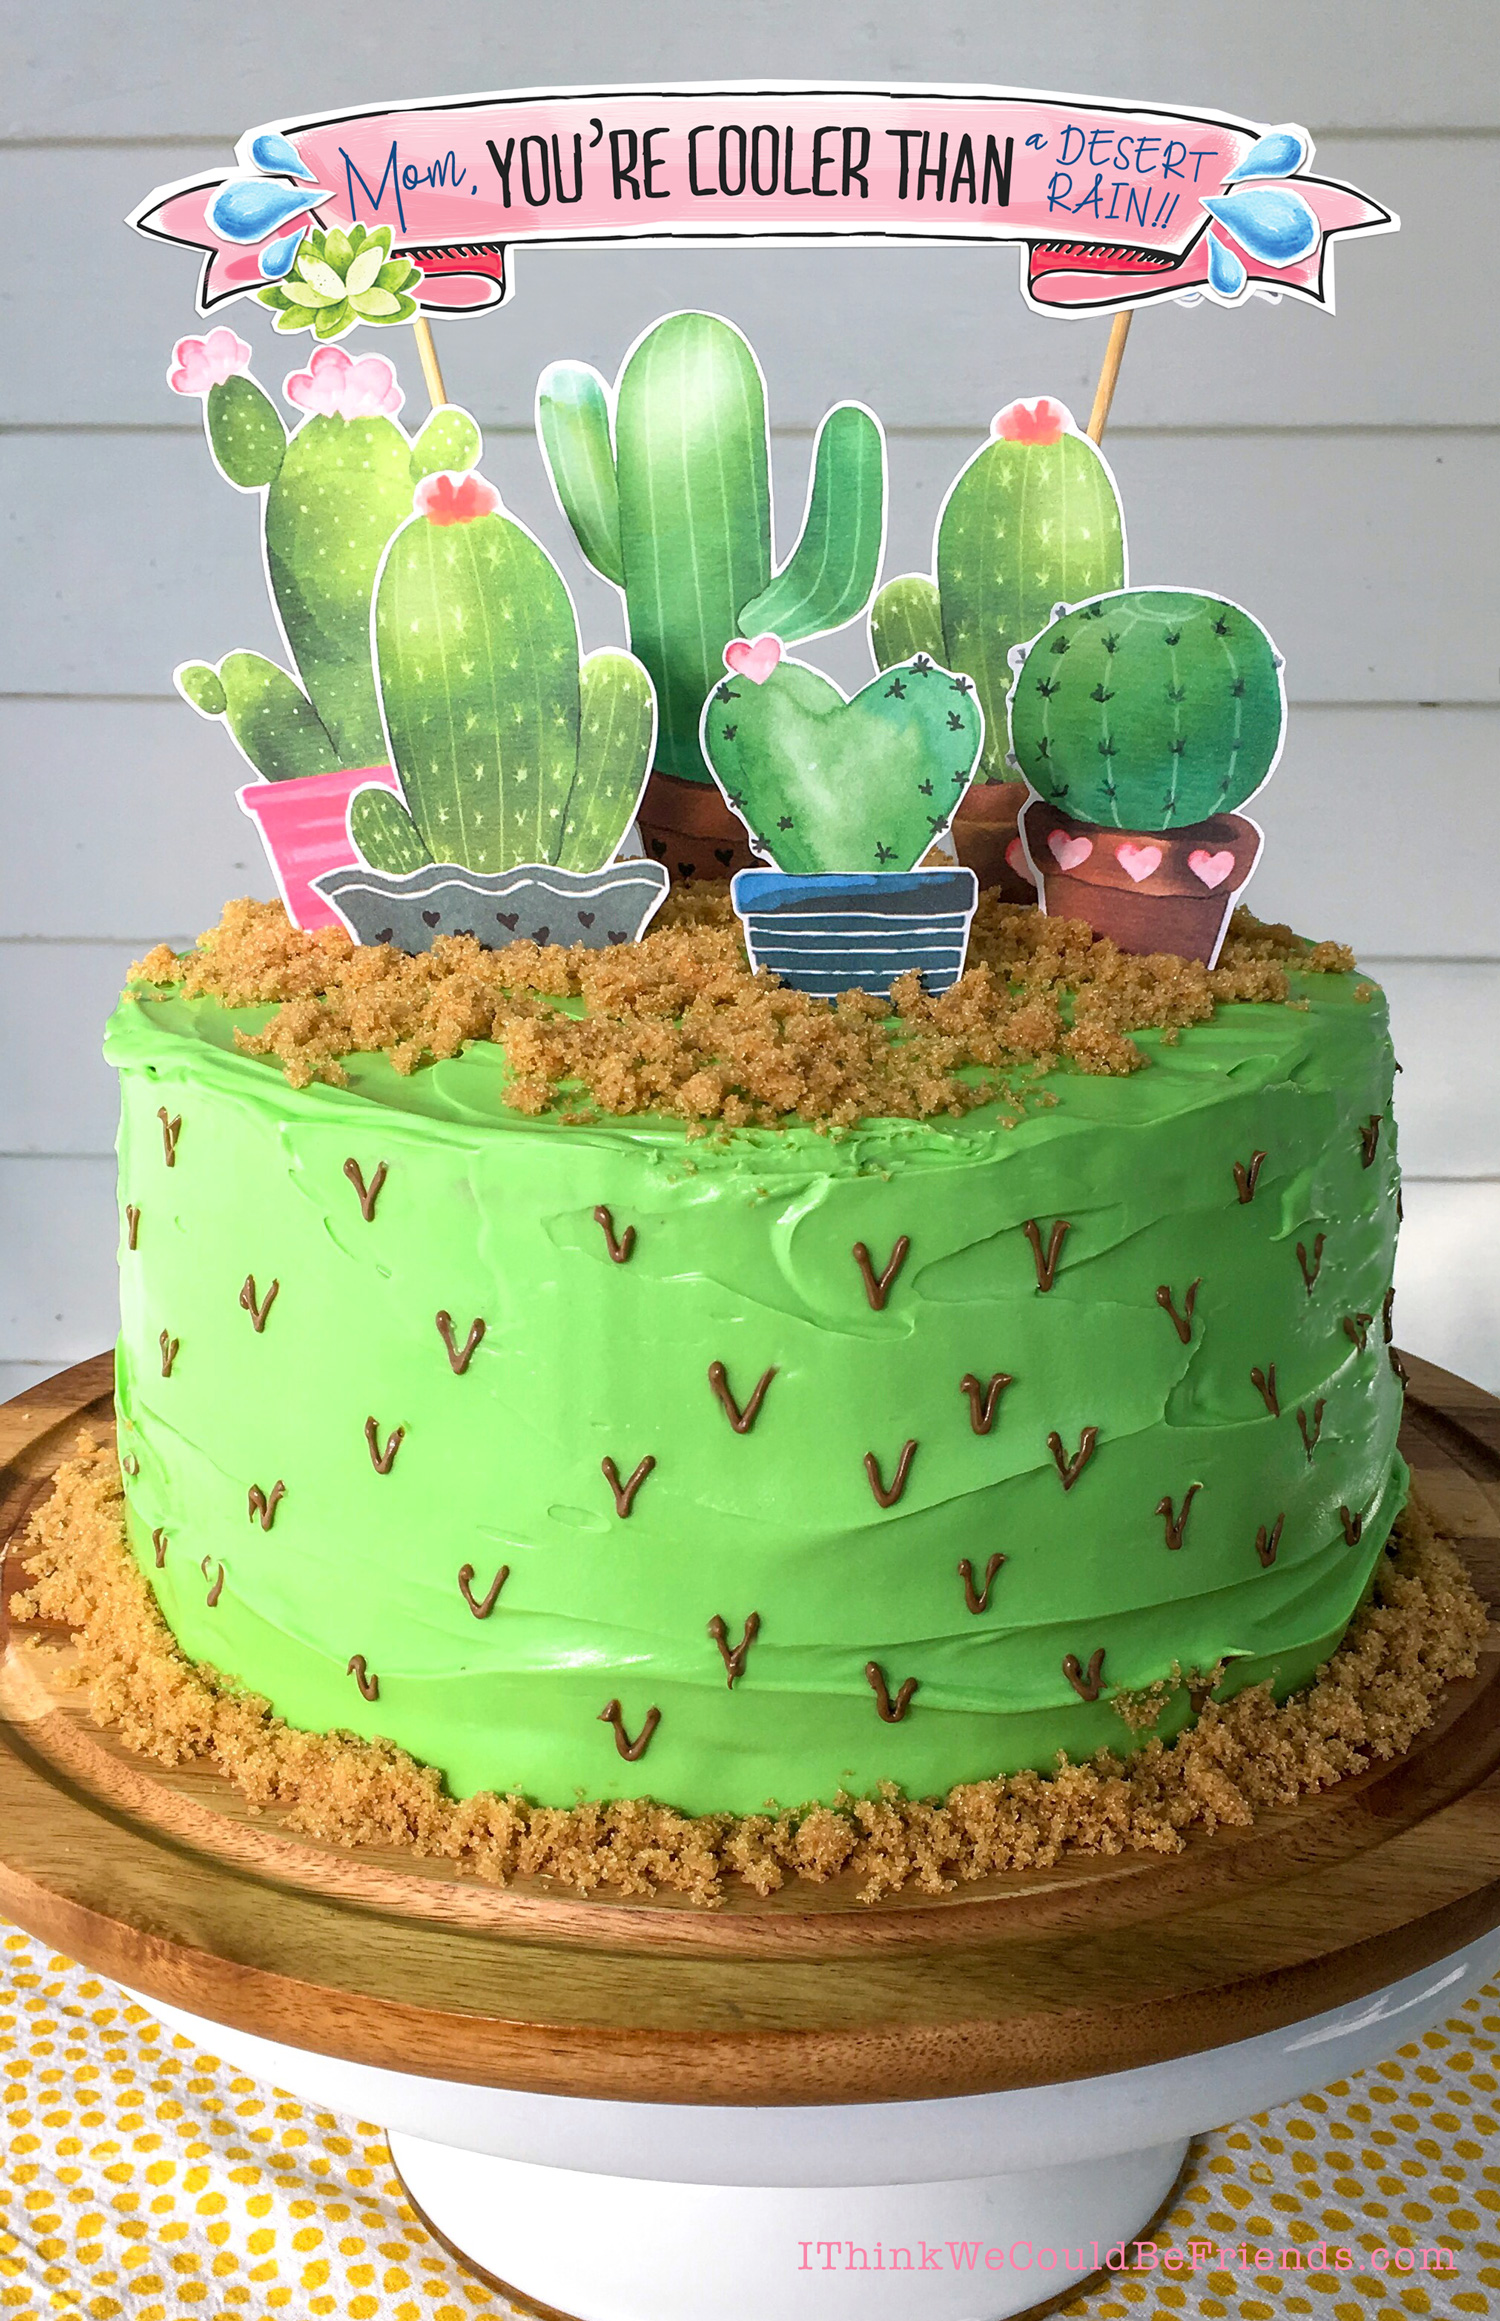 This Mother's Day Cactus Cake Topper is super EASY to make and FREE! What mom doesn't love that? You can put it on a homemade cake or store bought, just print, cut out the shapes, hot glue to skewer sticks and decorate! #mothers #day #cake #diy #decoration #topper #free #printable #cactus #succulent #easy